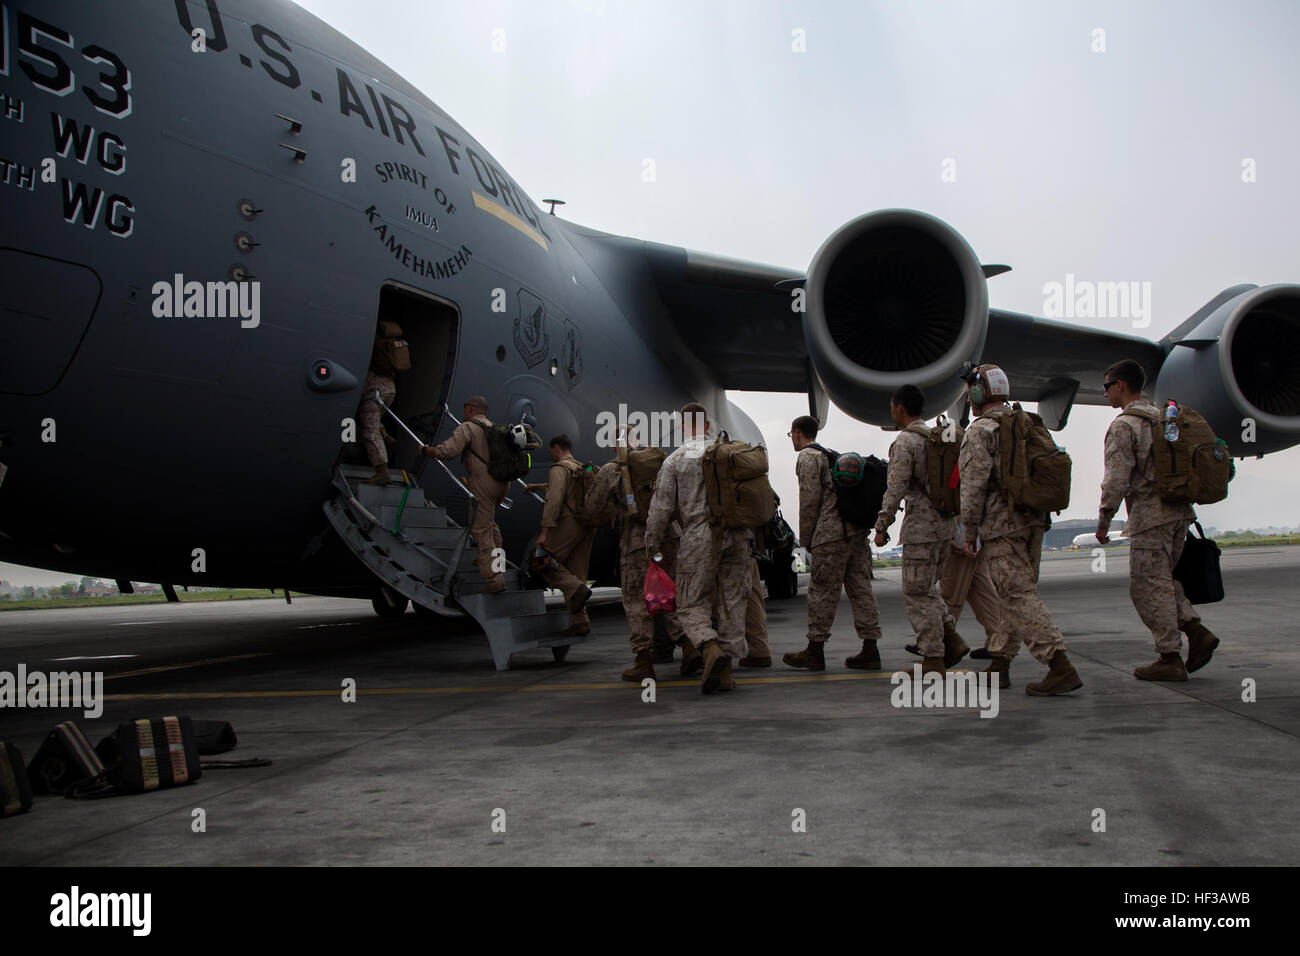 U.S. service members with Joint Task Force 505 board a U.S. Air Force C-17 Globemaster III at Tribhuvan International Airport, Kathmandu, Nepal, May 21 after Operation Sahayogi Haat. JTF 505 along with other multinational forces and humanitarian relief organizations were in Nepal providing aid after a 7.8 magnitude earthquake struck the country, April 25 and a 7.3 earthquake on May 12. At Nepal’s request the U.S. government ordered JTF 505 to provide unique capabilities to assist Nepal. (U.S. Marine Corps photo by MCIPAC Combat Camera Lance Cpl. Hernan Vidana/Released) JTF 505 departs Nepal 15 Stock Photo